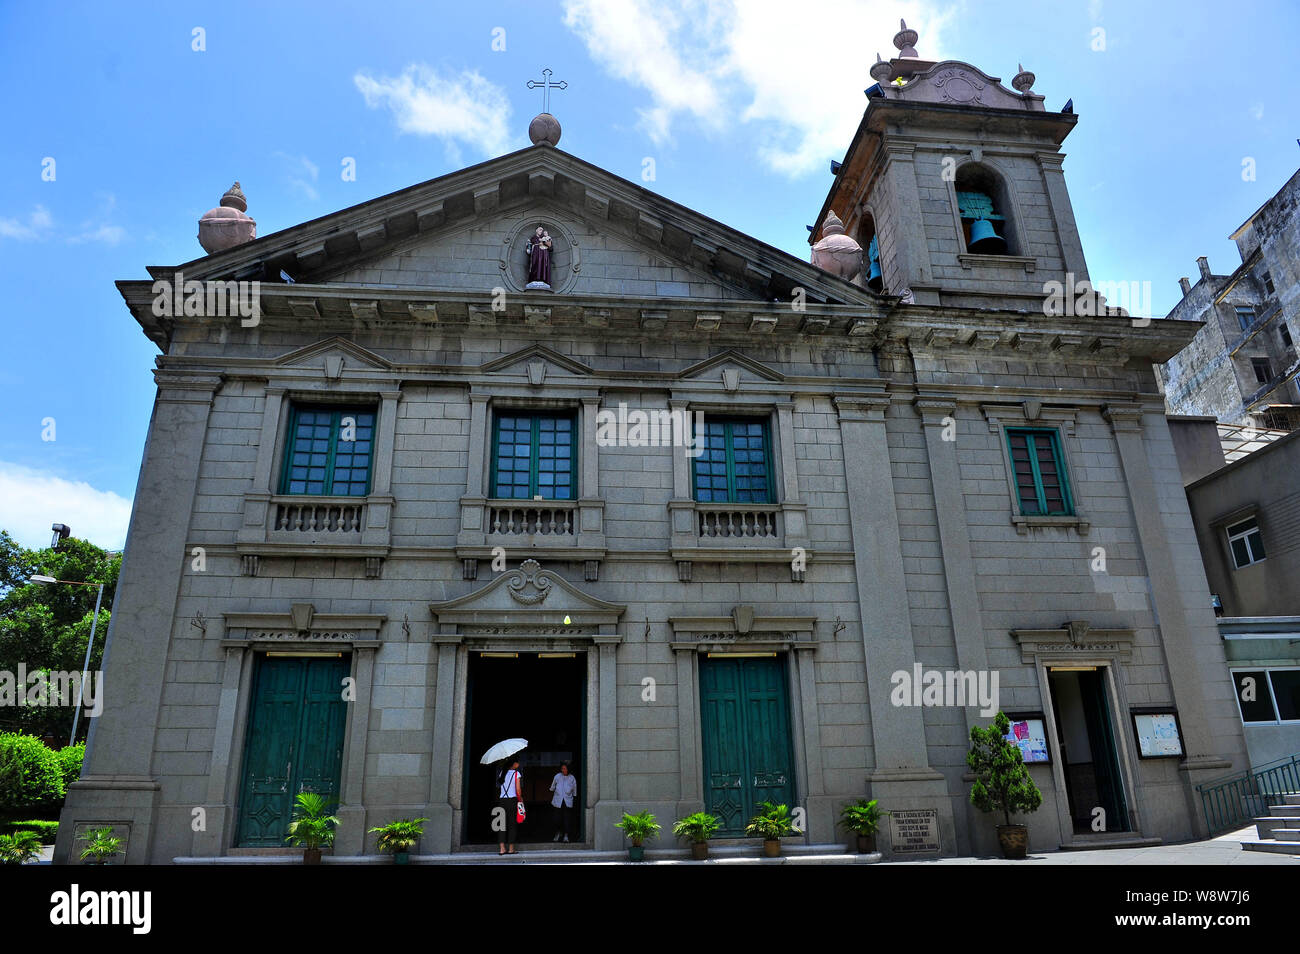 View of St. Anthonys Church of Historic Centre of Macau in Macau, China, 29 July 2011. Stock Photo